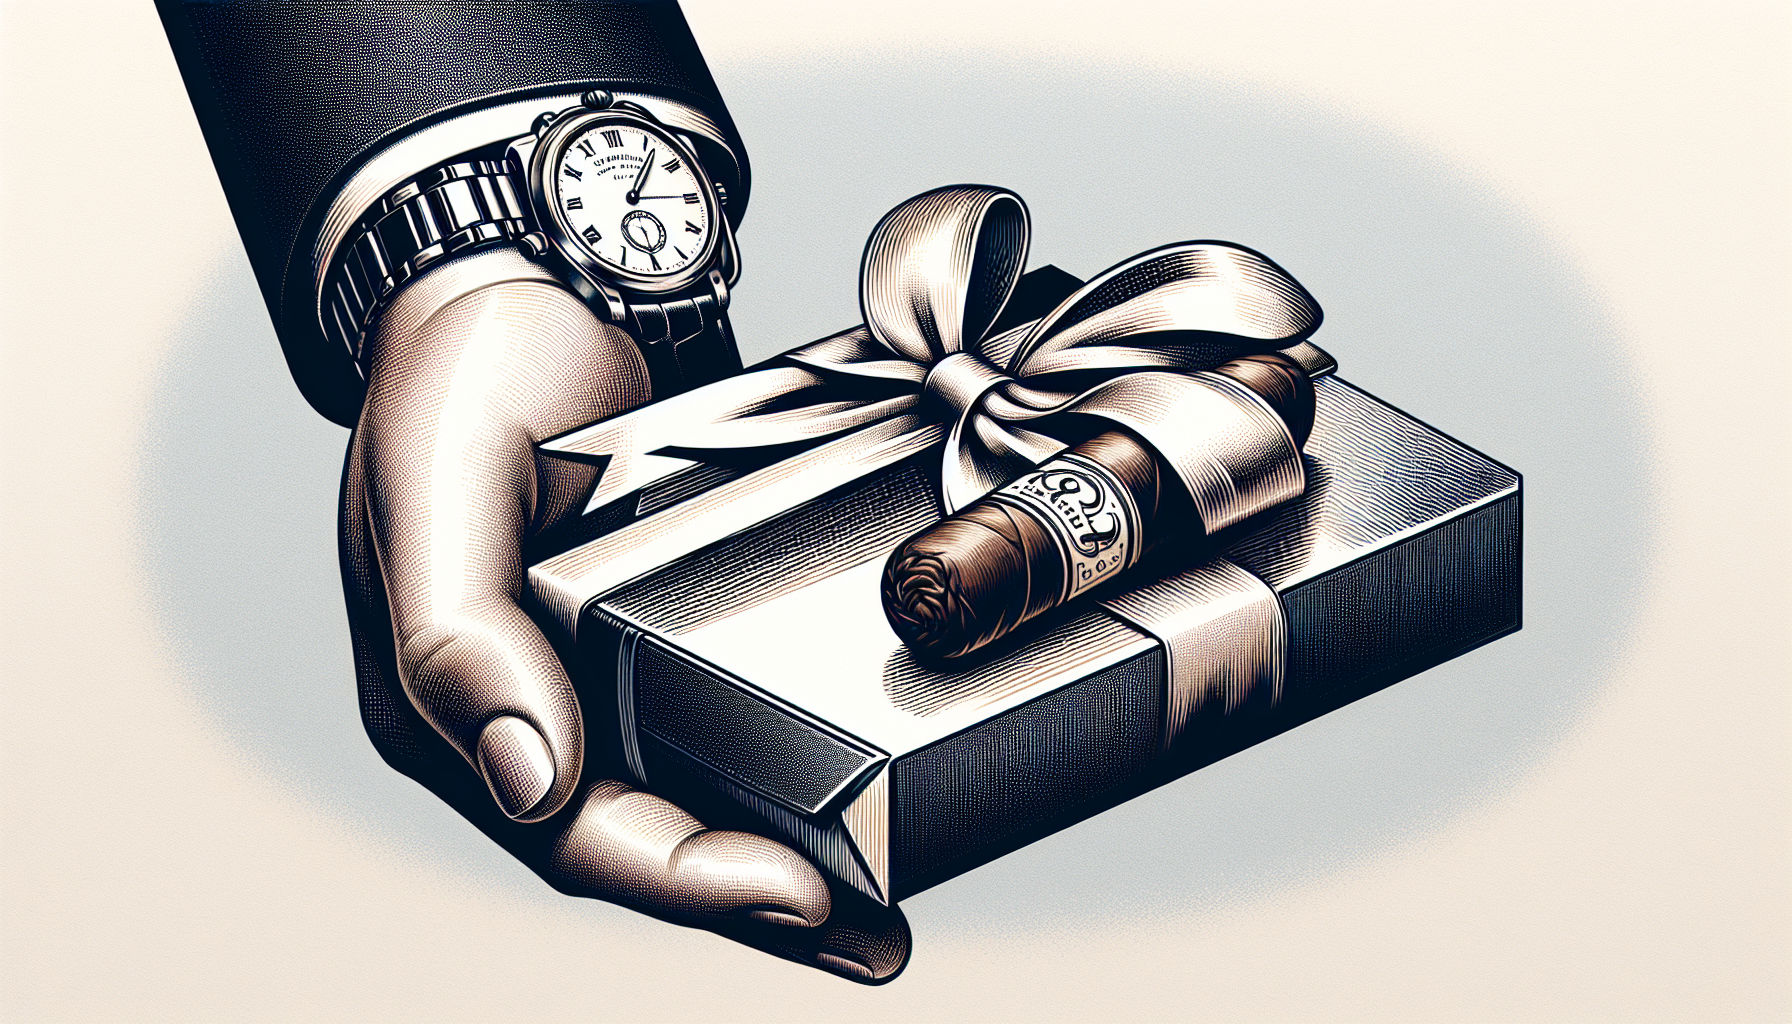 Illustration of a hand presenting a wrapped cigar magazine subscription as a gift